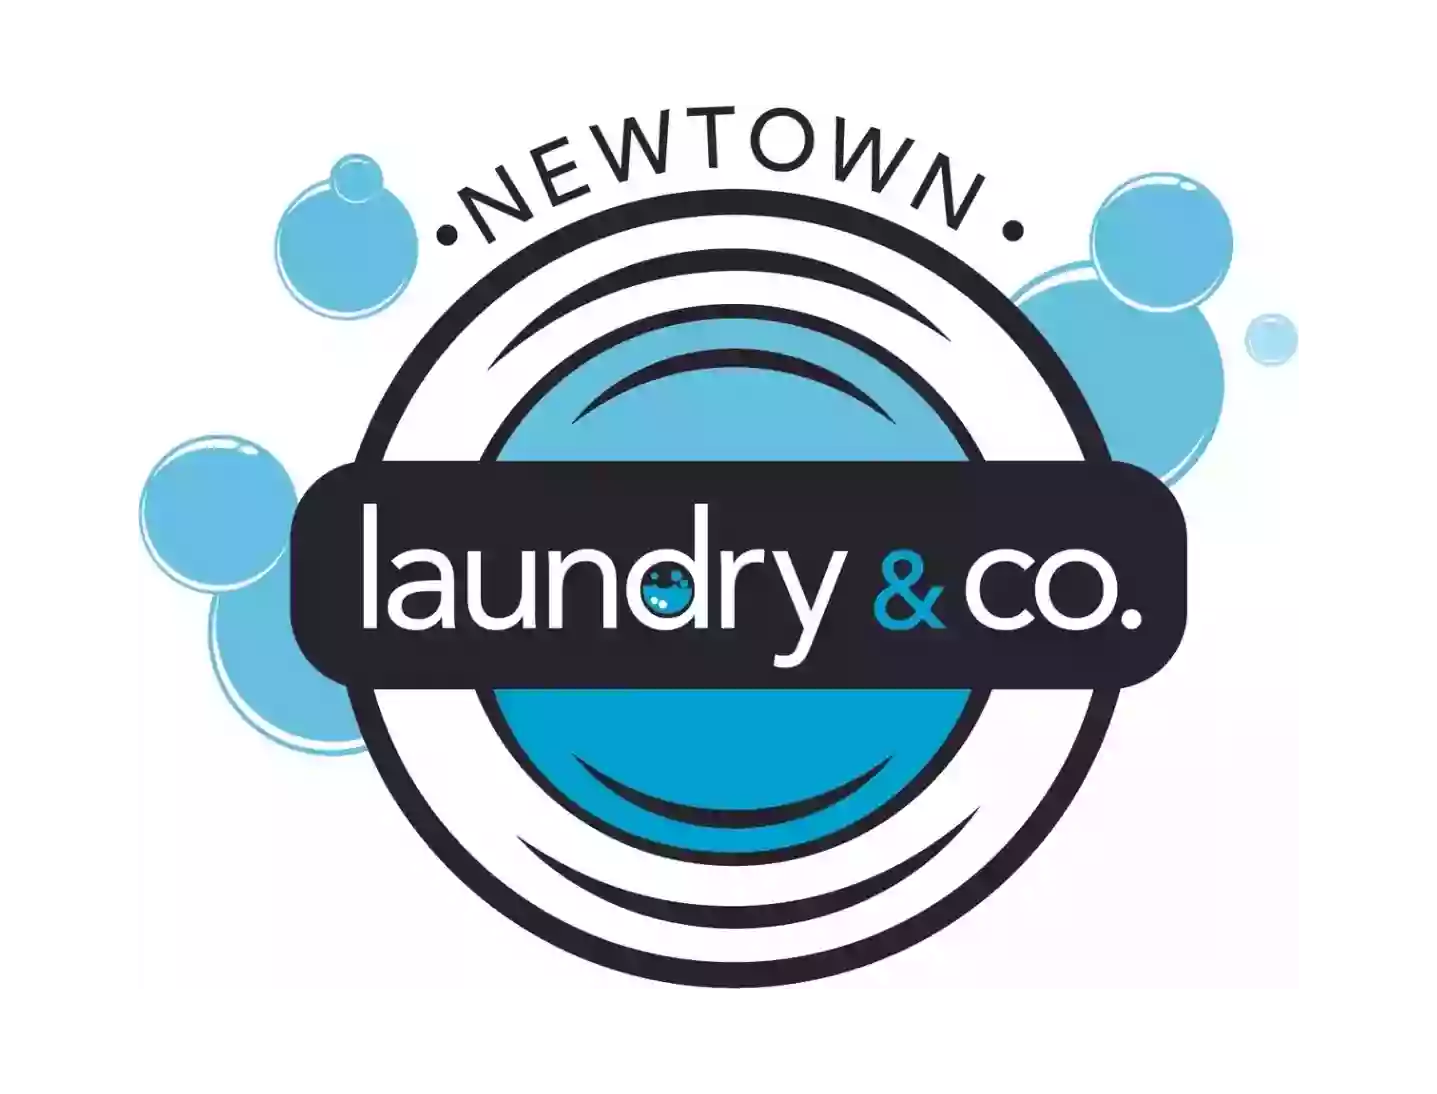 Newtown Laundry & Co